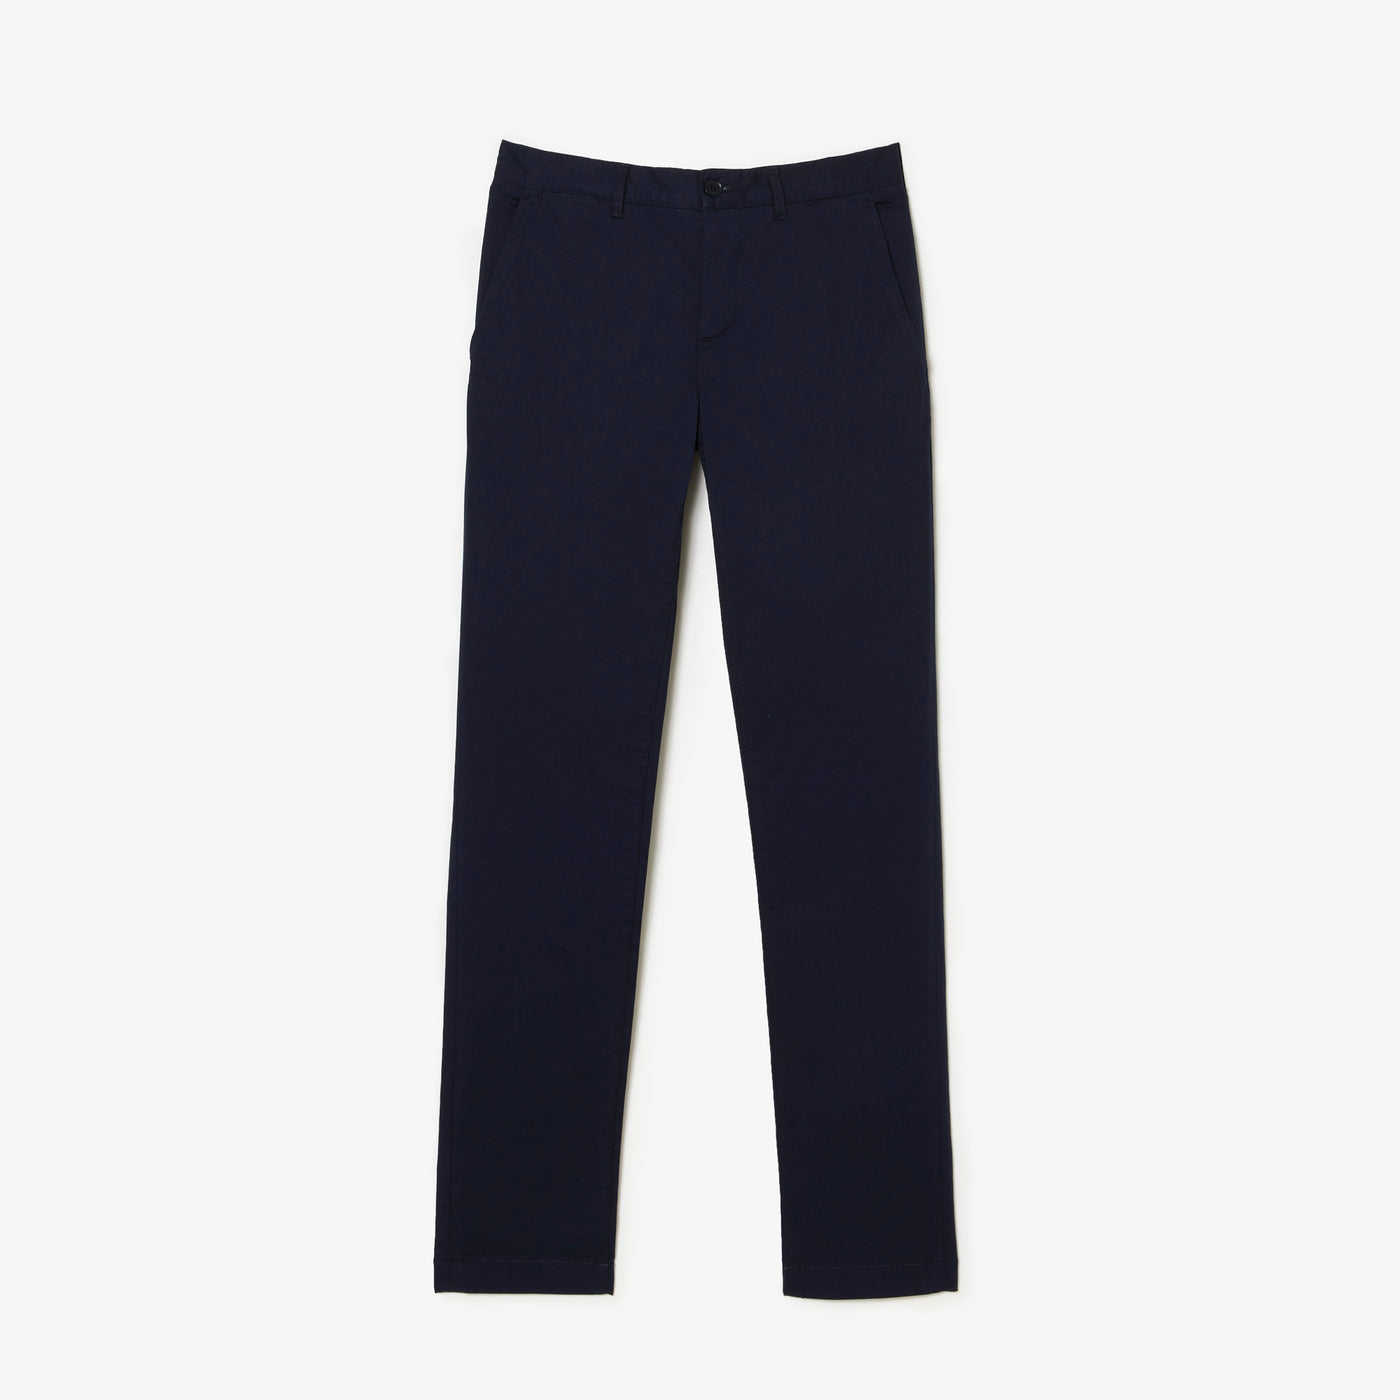 Shop The Latest Collection Of Lacoste Men'S Slim Fit Stretch Cotton Chino Trousers - Hh7970 In Lebanon